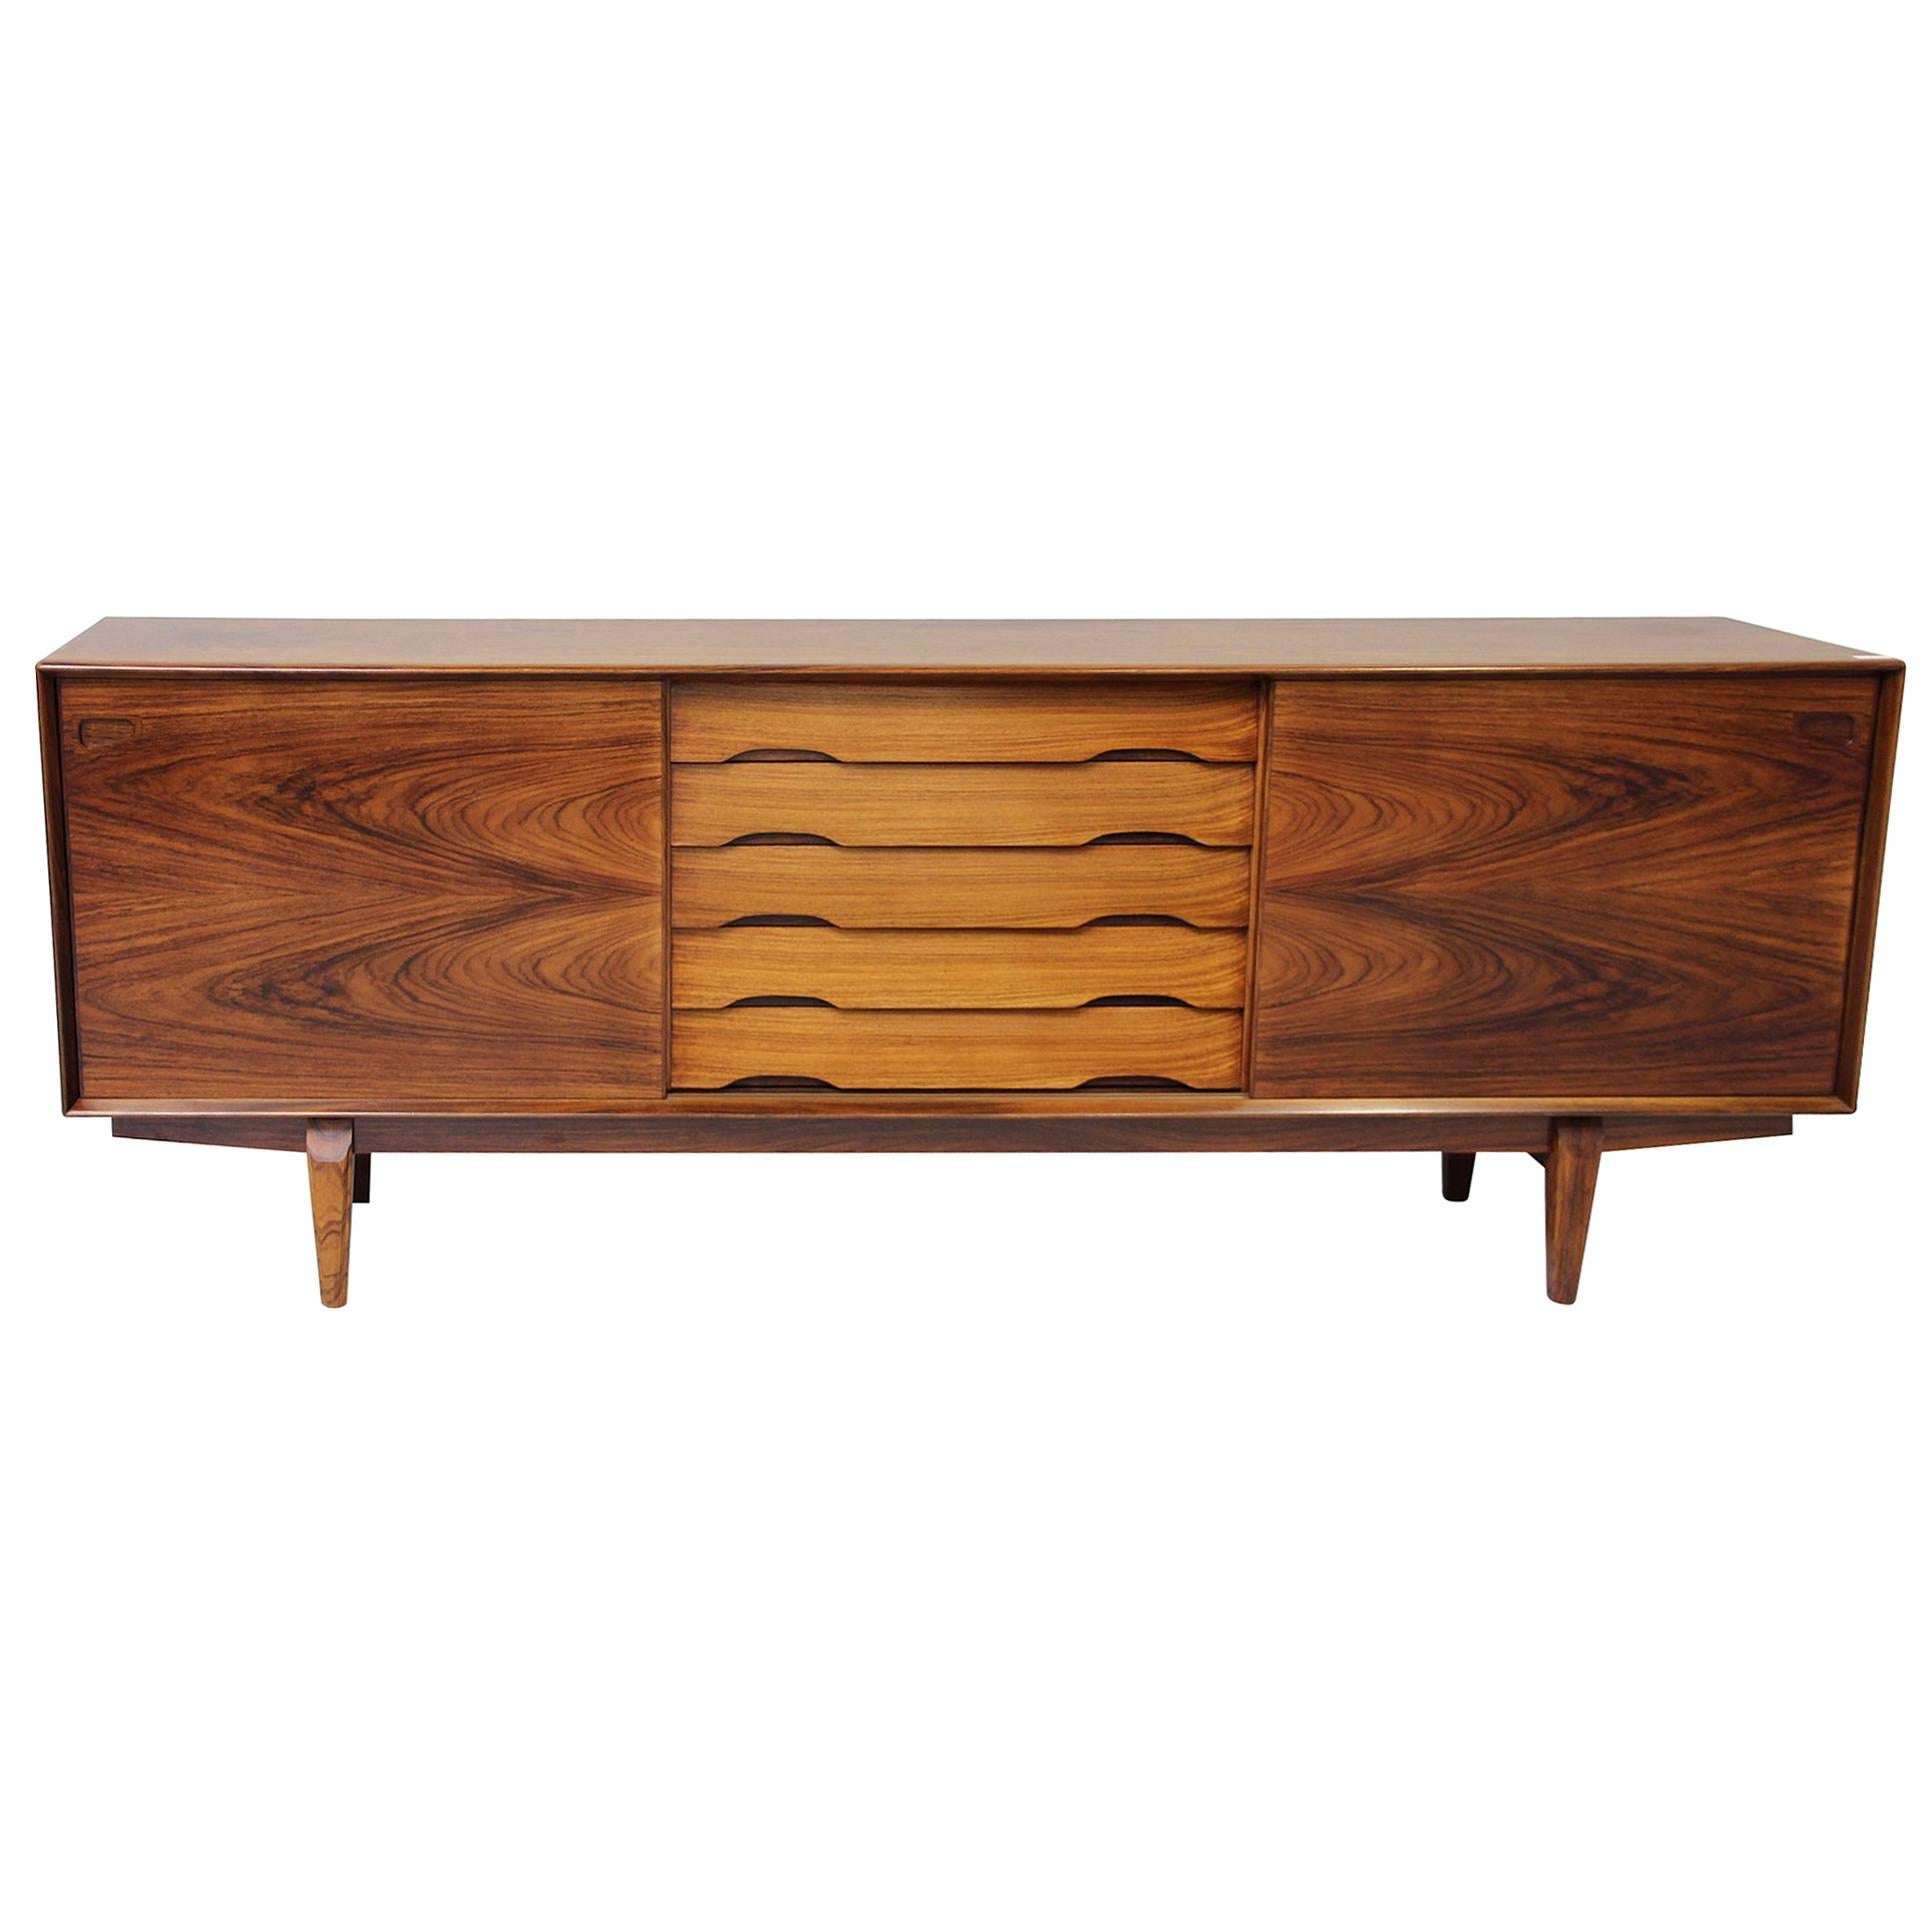 Beautiful Danish midcentury No. 65 sideboard by Skovby Mobler. In beautiful rosewood, with five drawers and two sliding door on the front and the inside with shelves. More photos coming soon.

Measure: H 82cm, W 220cm, D 47 cm.

Ships worldwide -